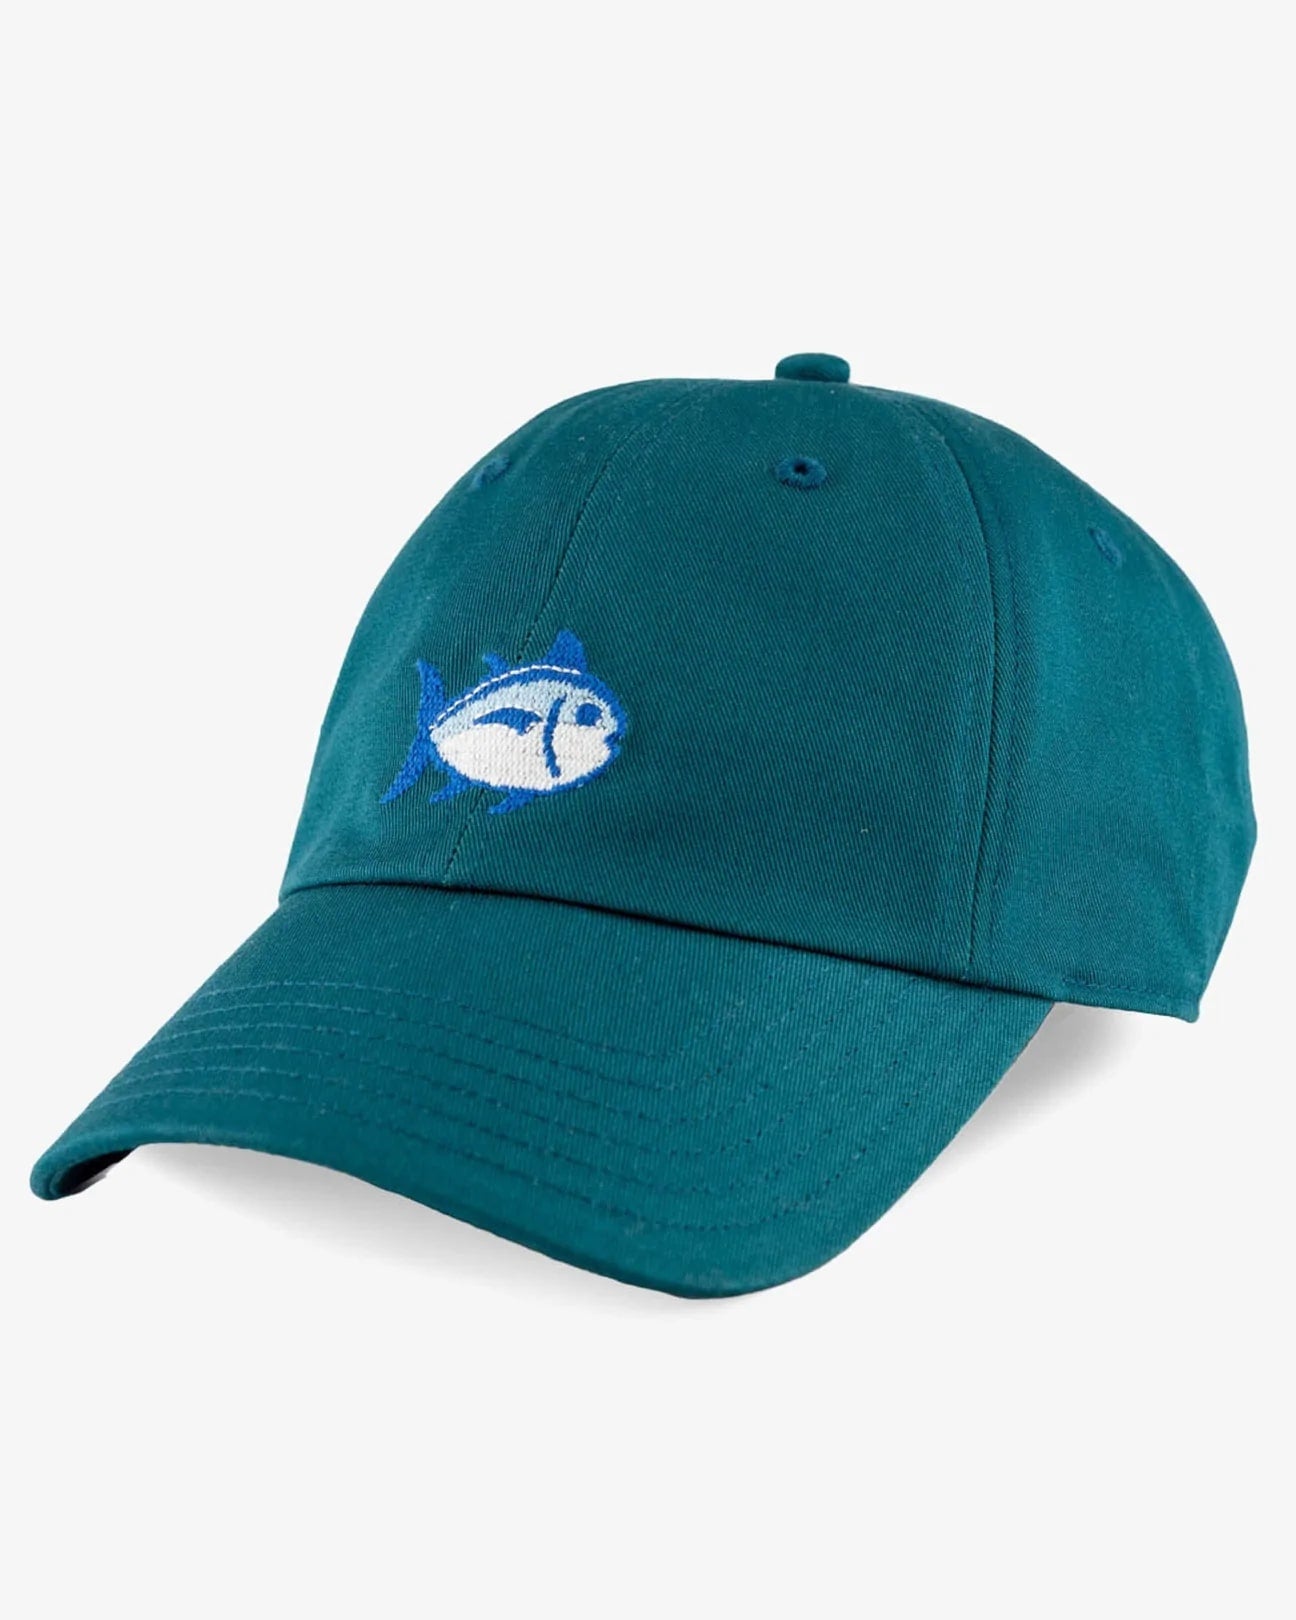 Southern Tide® - Front view of the green men's hat with the Southern Tide fish logo